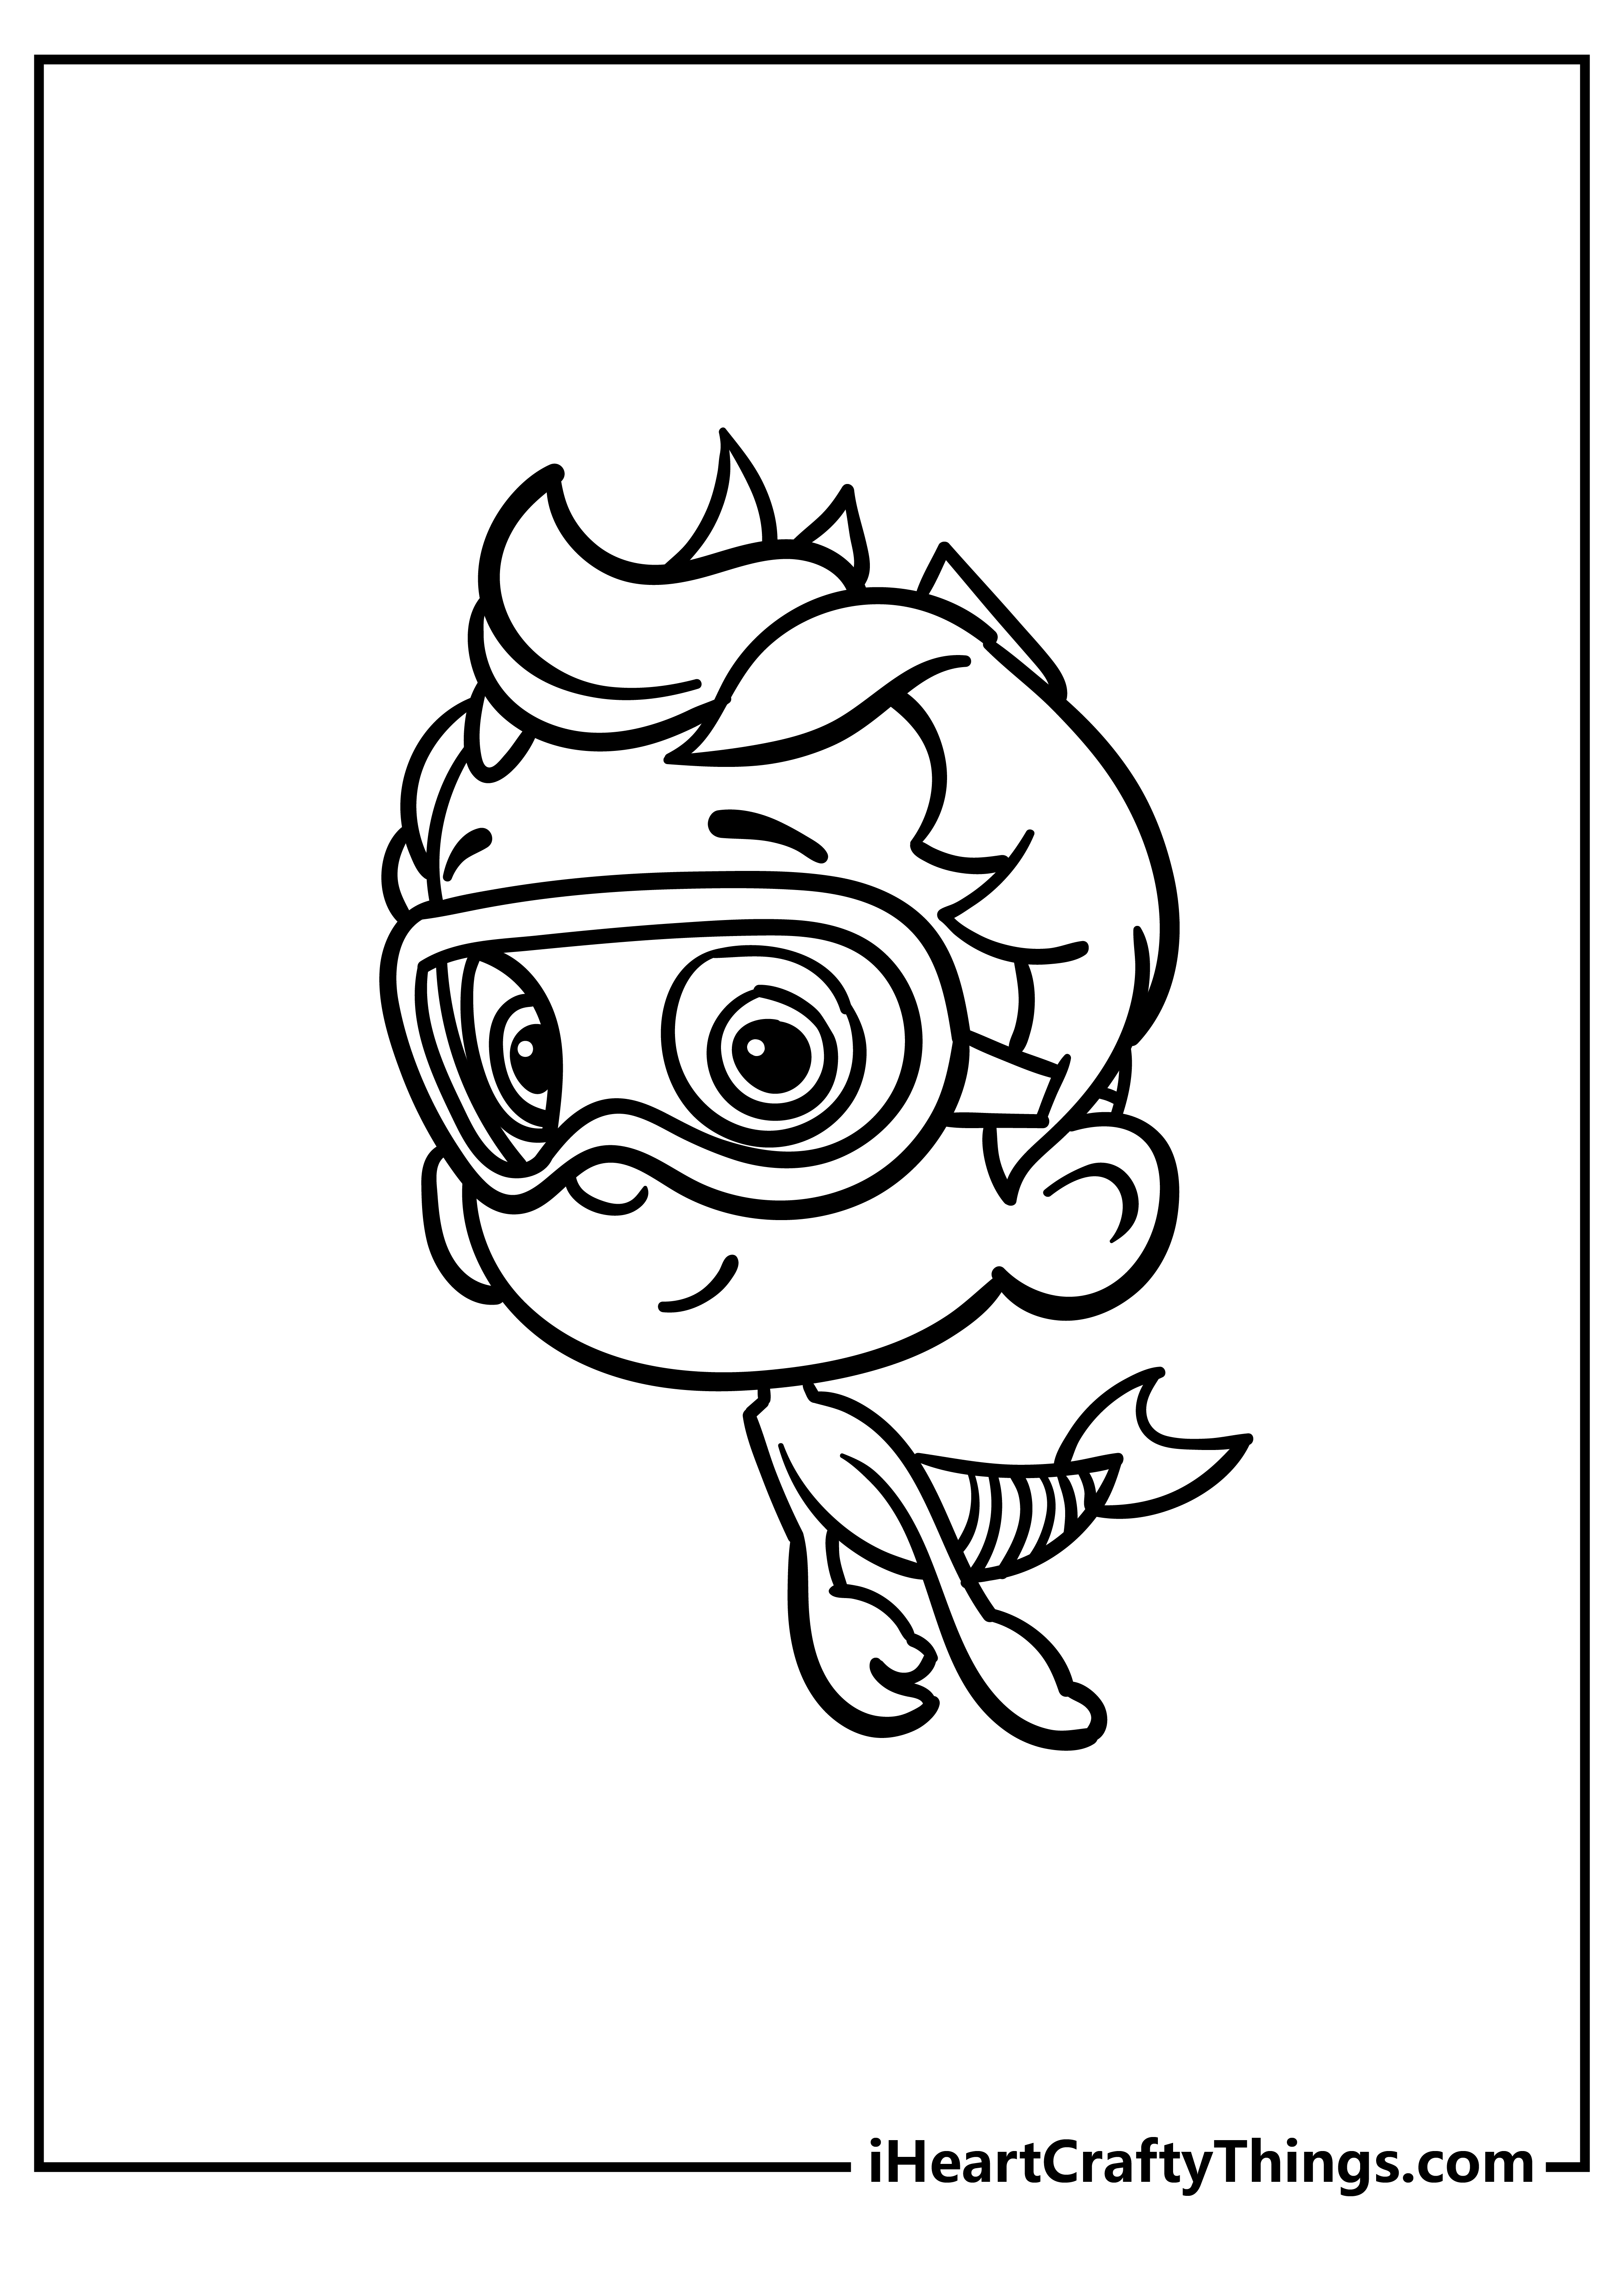 Bubble Guppies Coloring Pages for kids free download